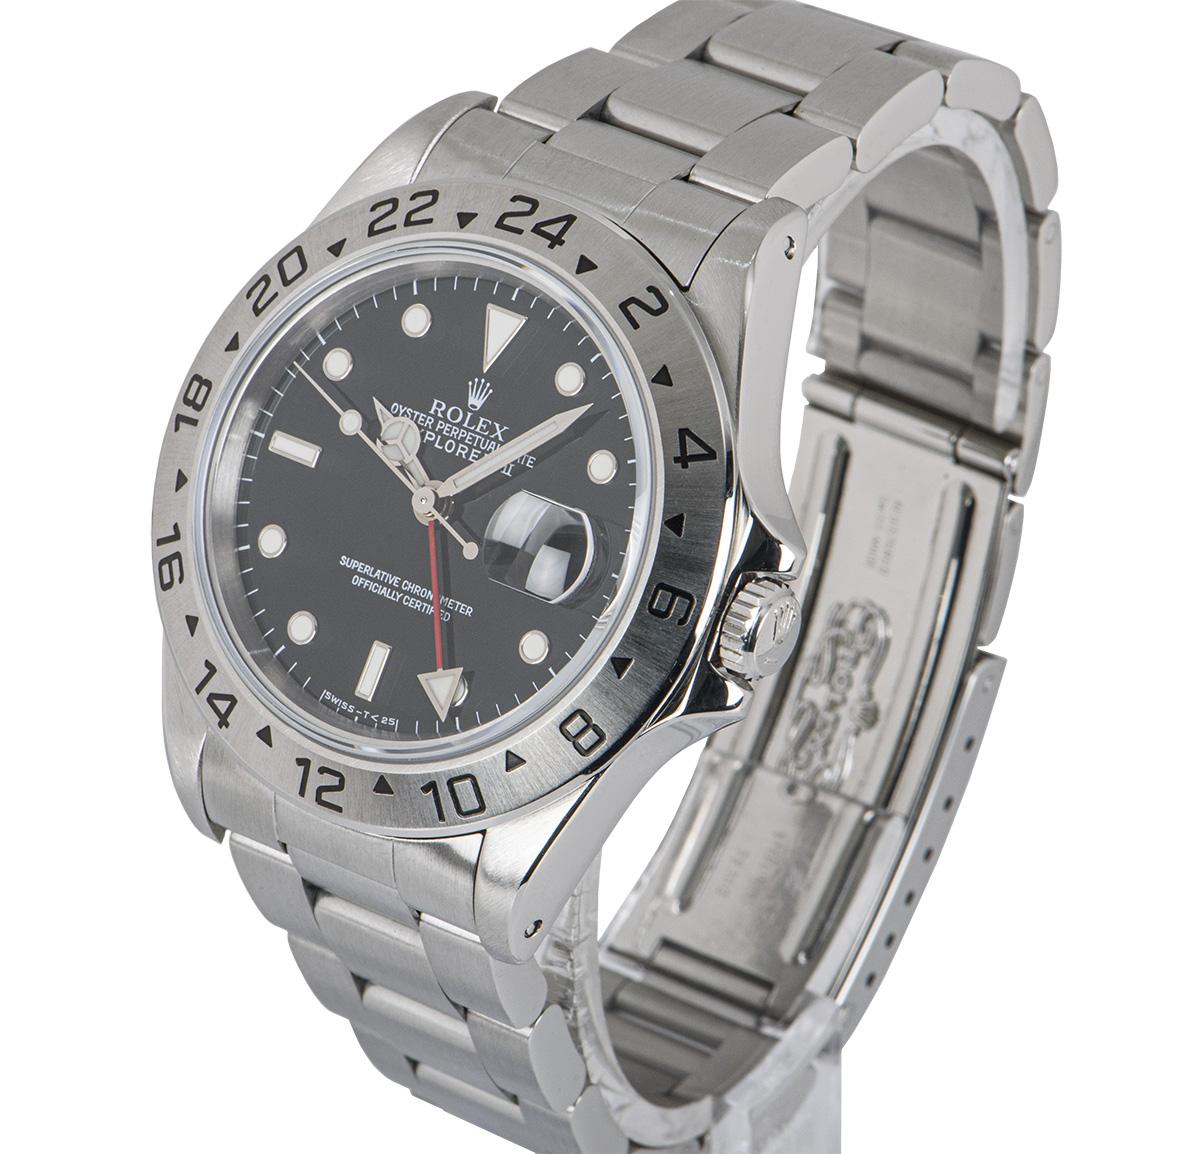 A 40 mm Stainless Steel Oyster Perpetual Explorer II Gents Wristwatch, black dial with applied hour markers, date at 3 0'clock, red time zone hand, a fixed stainless steel bezel with an engraved 24 hour display, a stainless steel oyster bracelet